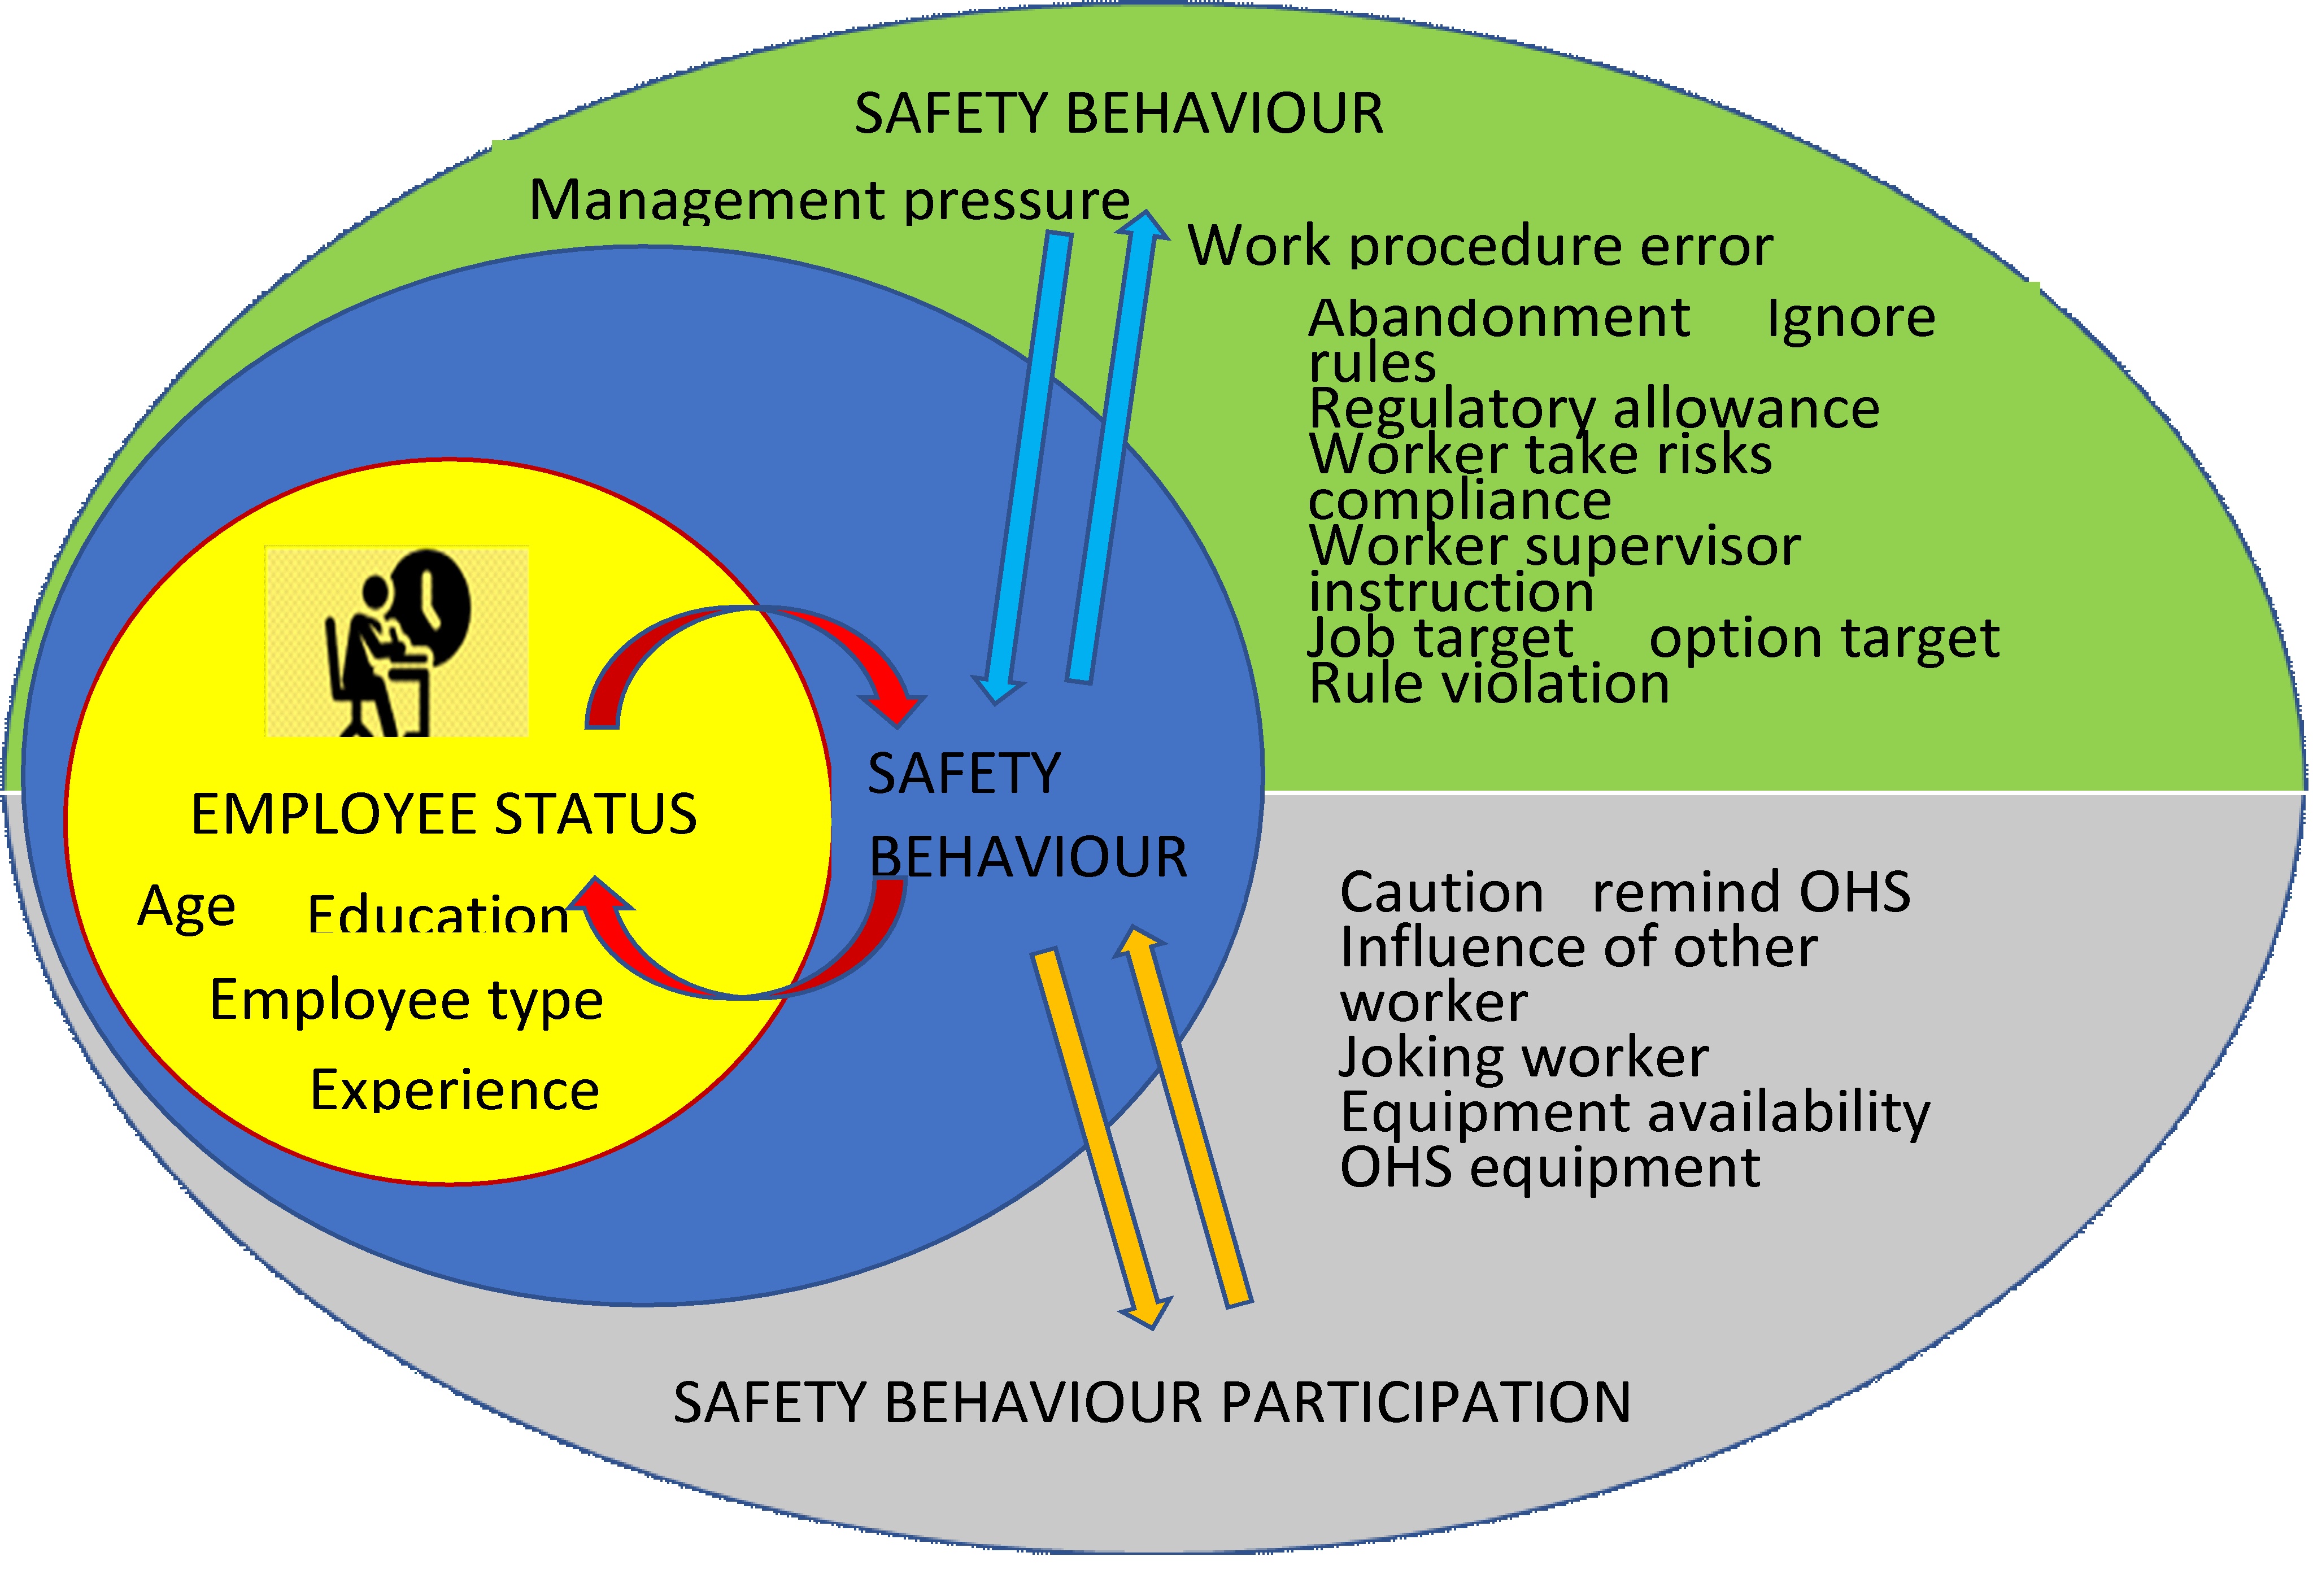 Analysis of the effect of employee status on construction worker's safety behavior using structural equation model